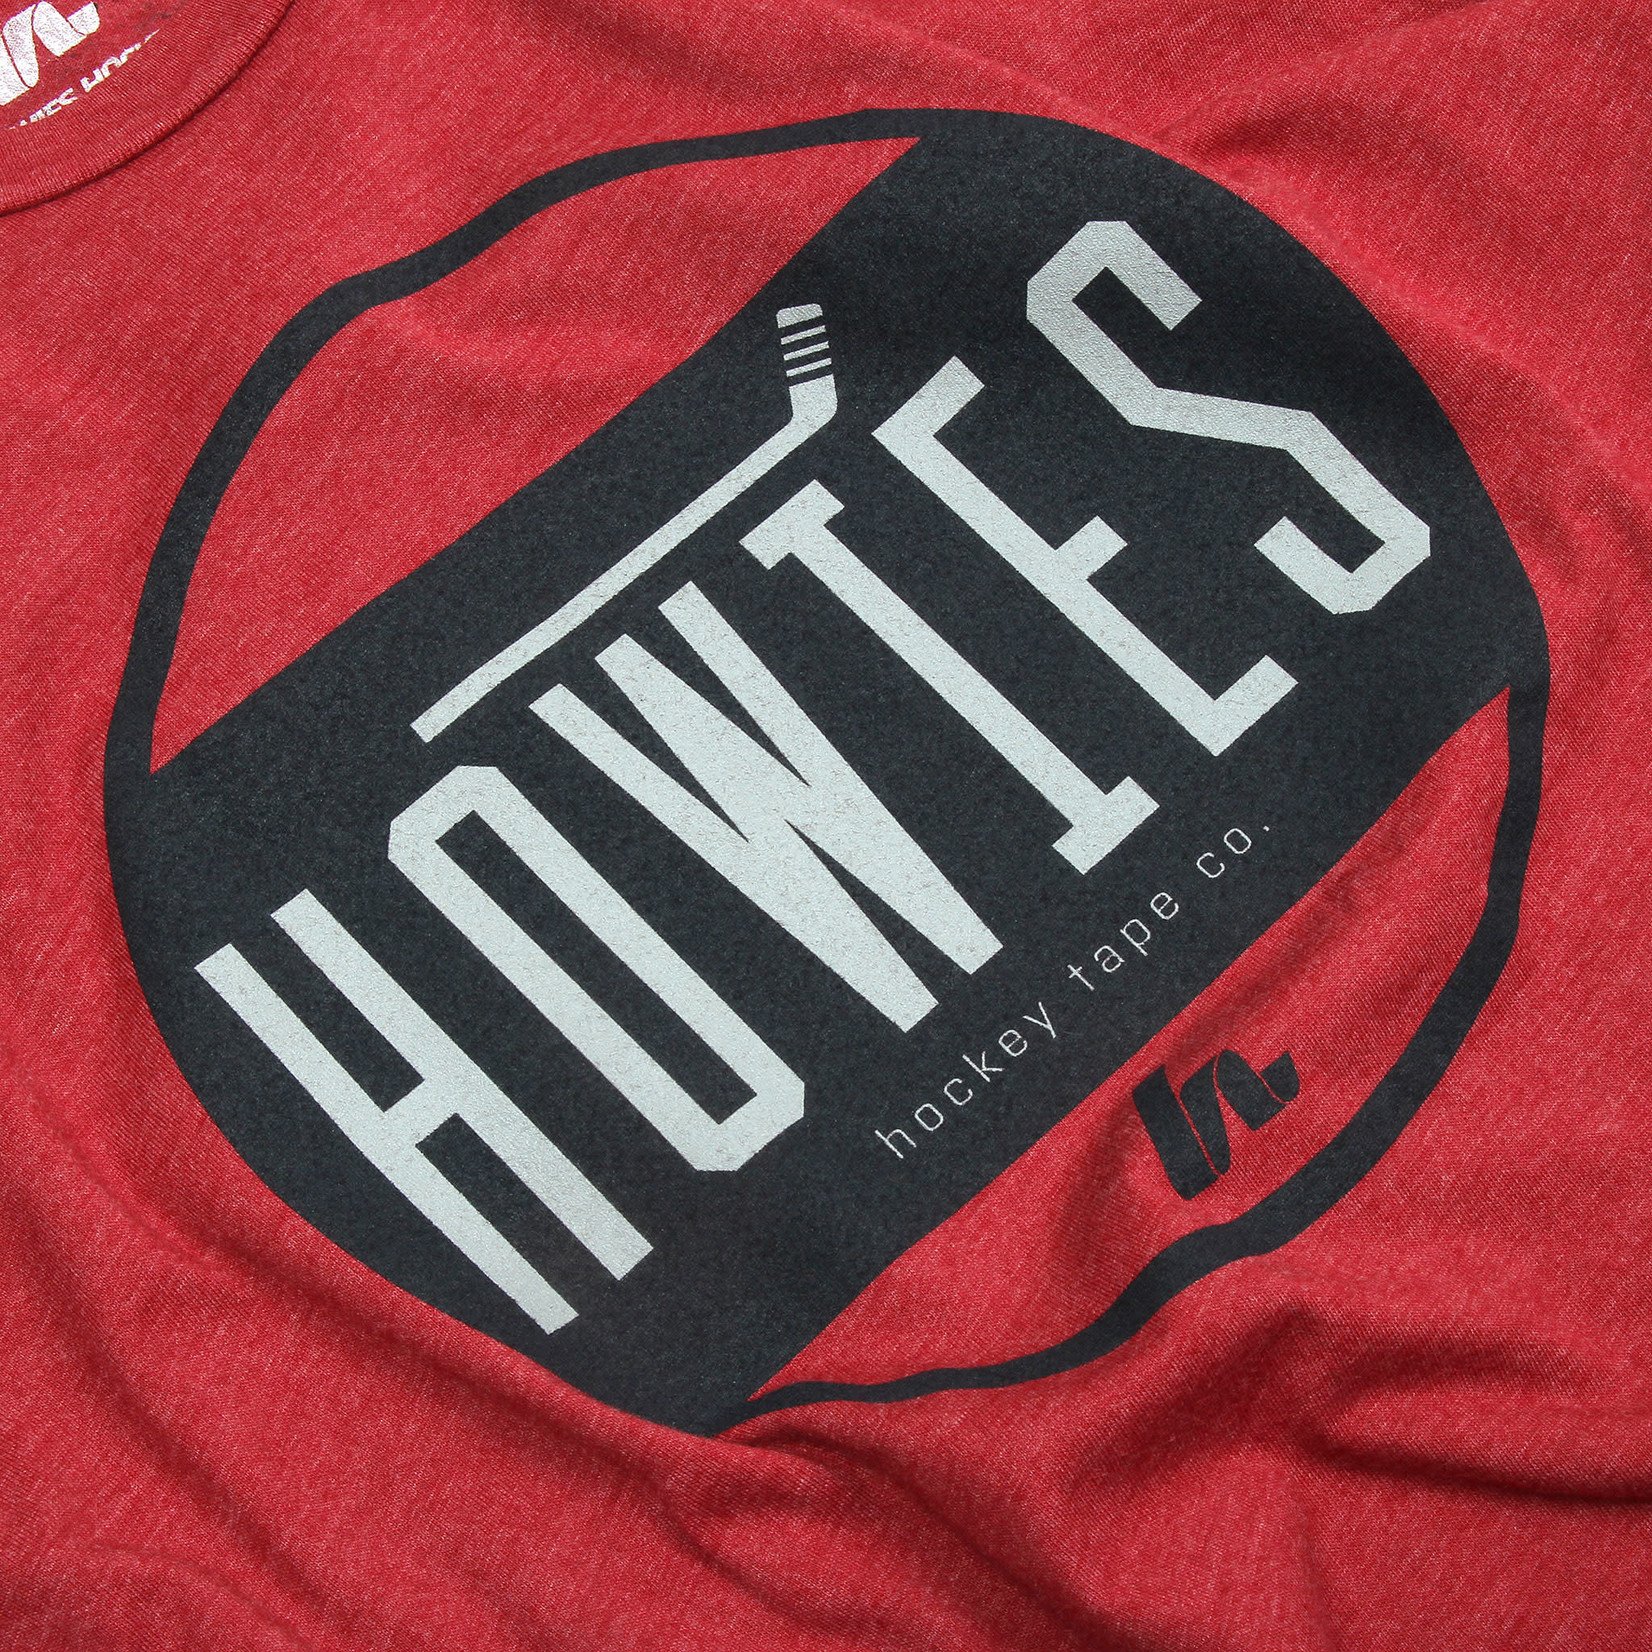 Howies T-Shirt Howies